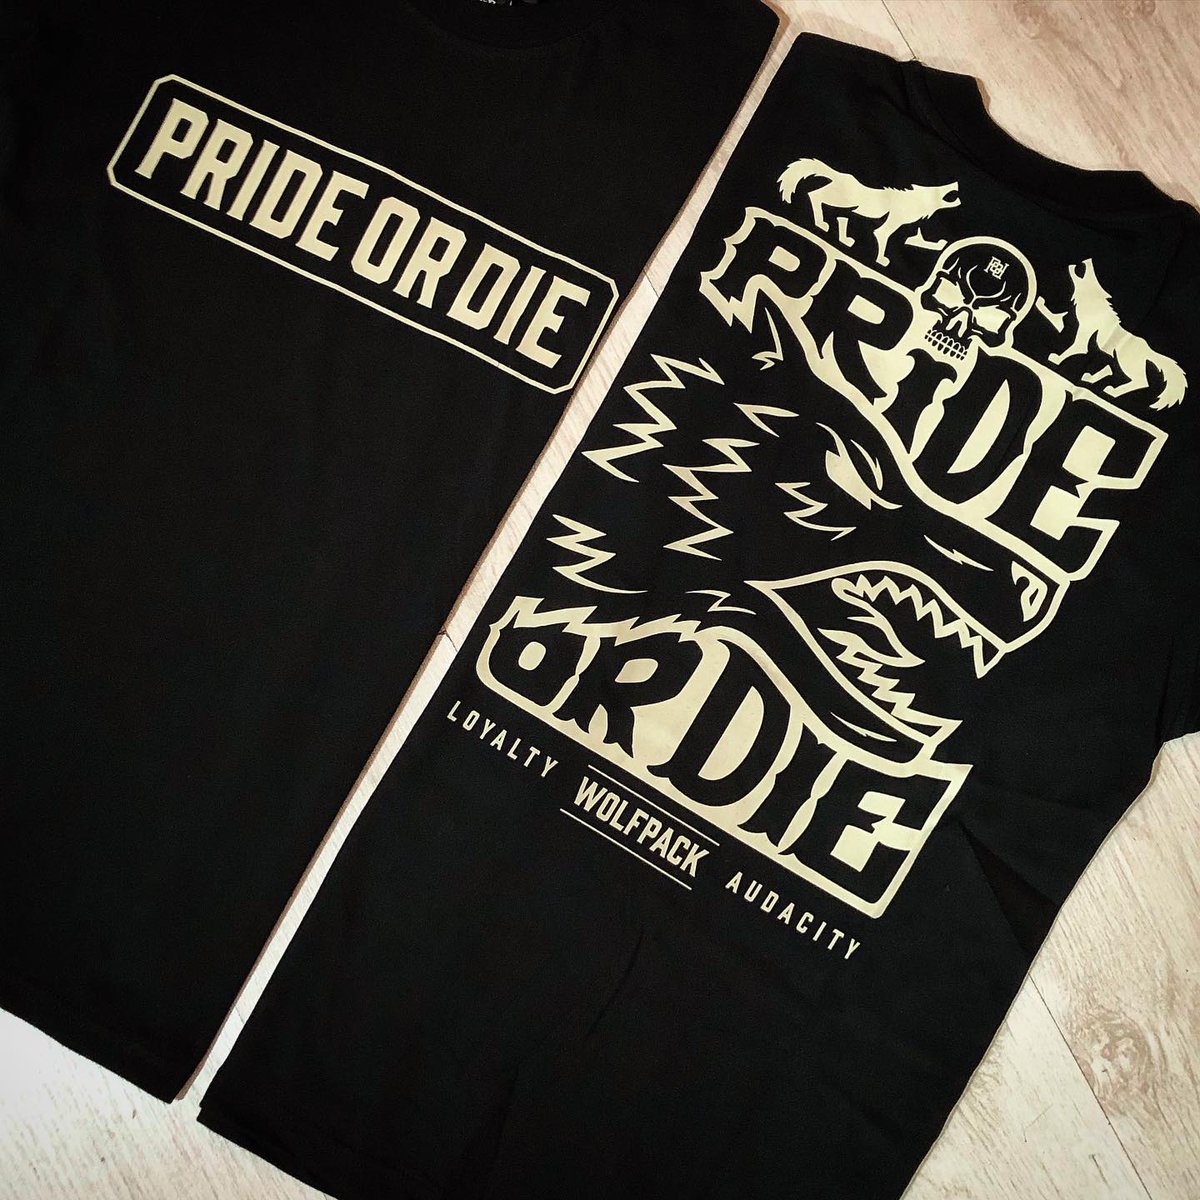 🆕️ Tshirt PRiDEorDiE 'WOLFPACK' V2 
👊 Disponible dès maintenant !
📦 Expédition sous 48h.
🐺 Become a #PRiDEorDiE members & join the #PoDfamily ! 
-----------------
🛒 prideordie.com
🌍 Worldwide delivery